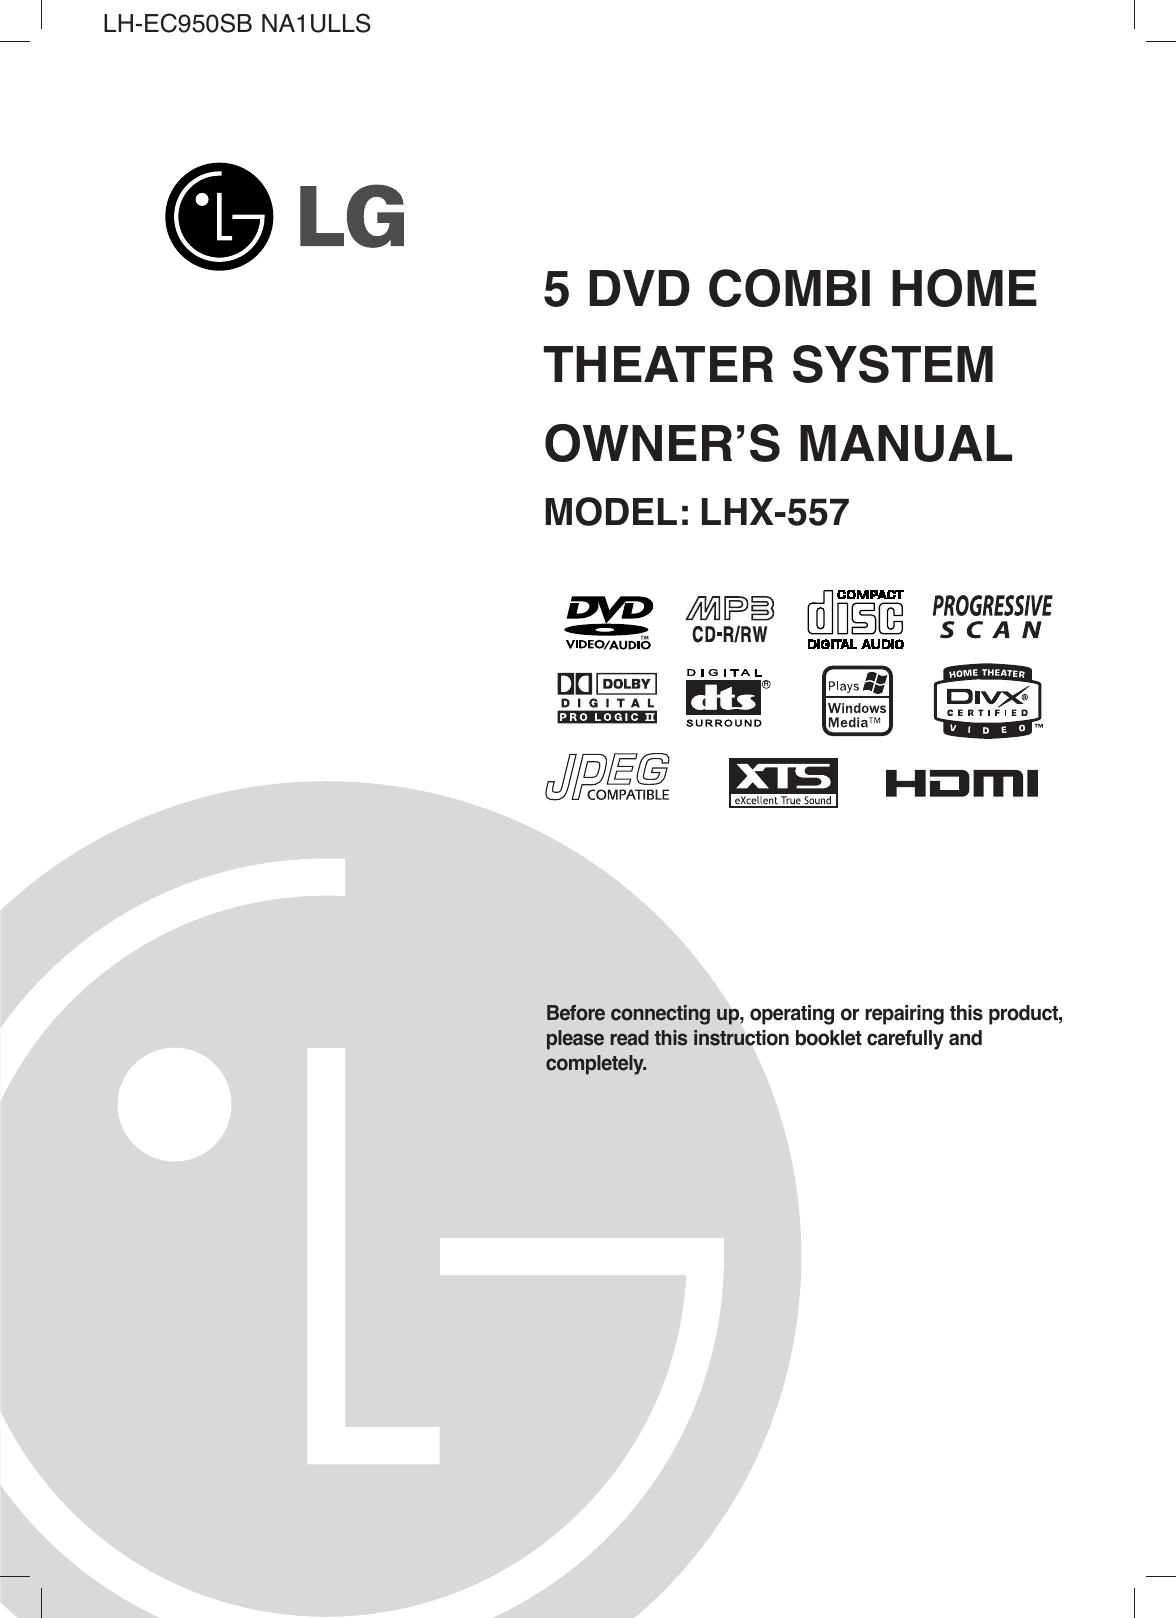 5 DVD COMBI HOMETHEATER SYSTEMOWNER’S MANUALMODEL: LHX-557Before connecting up, operating or repairing this product,please read this instruction booklet carefully and completely.LH-EC950SB NA1ULLSR